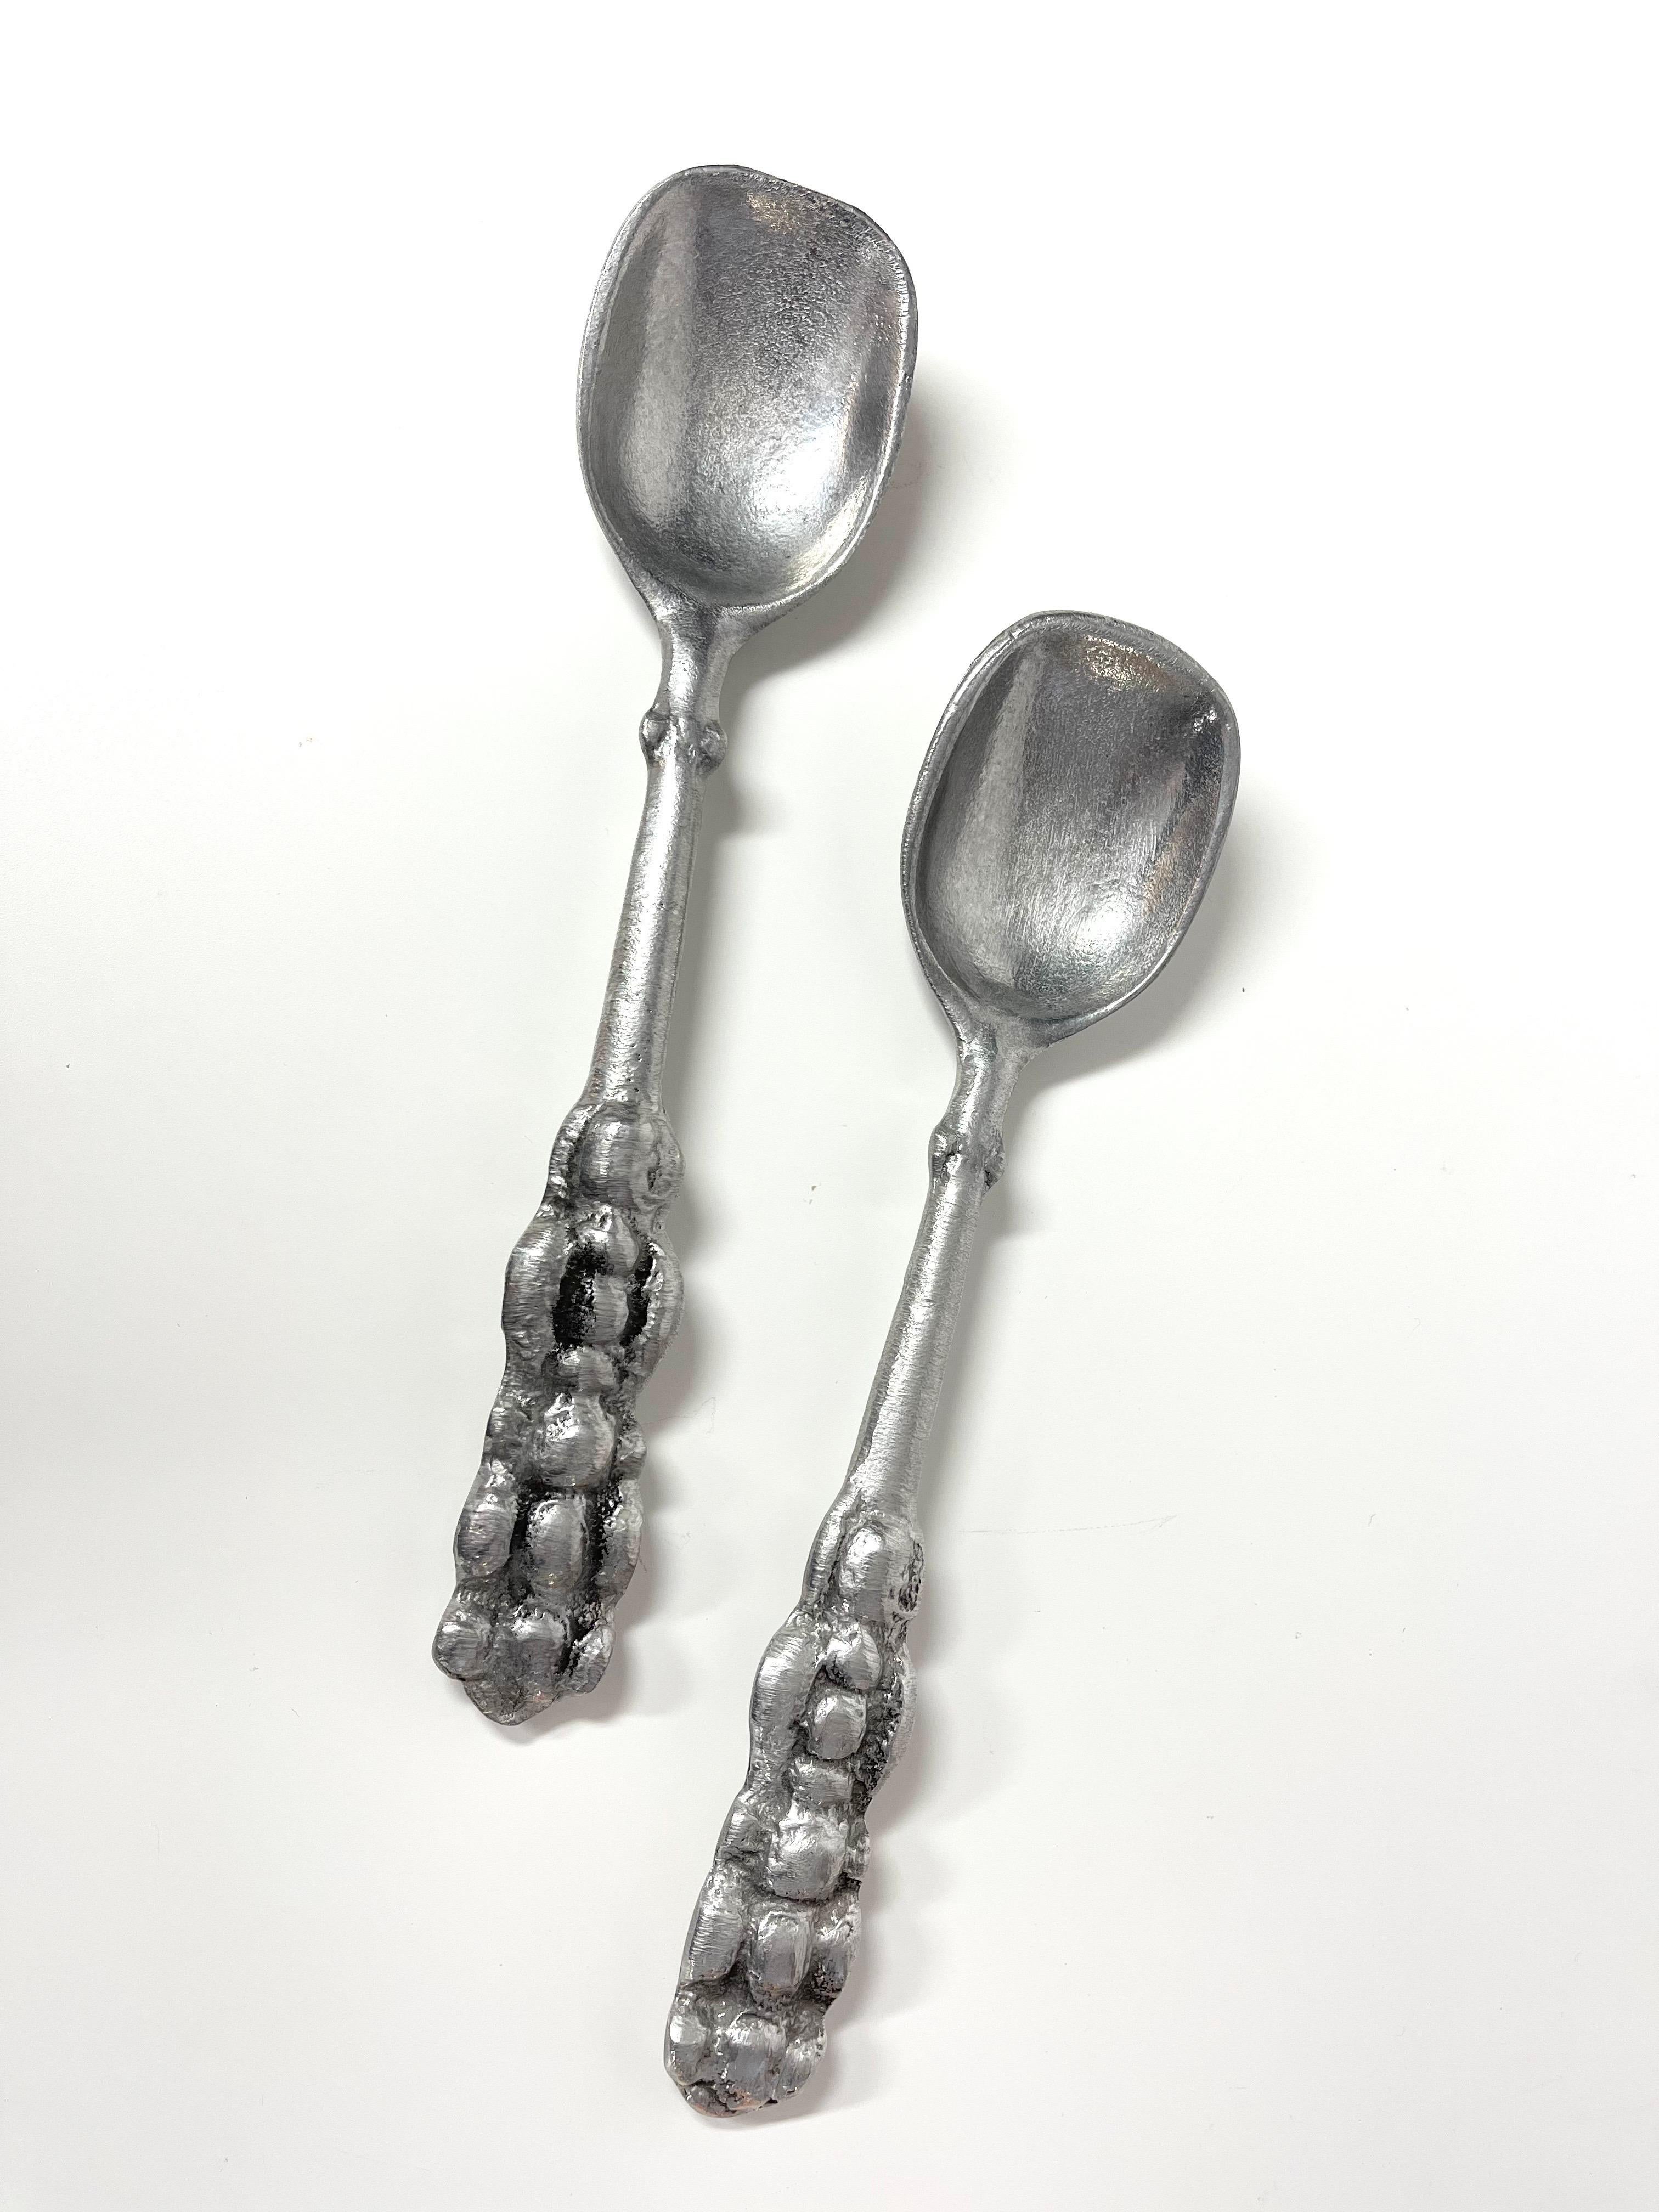 Pair of Don Drumm Bubble Spoons. Perfect for a collector. Use them as serving spoons or as salad tongs. Great Brutalist style in aluminum with bulbous handles.
Don Drumm was born in Warren, Ohio in 1935. After studying medicine for two years at